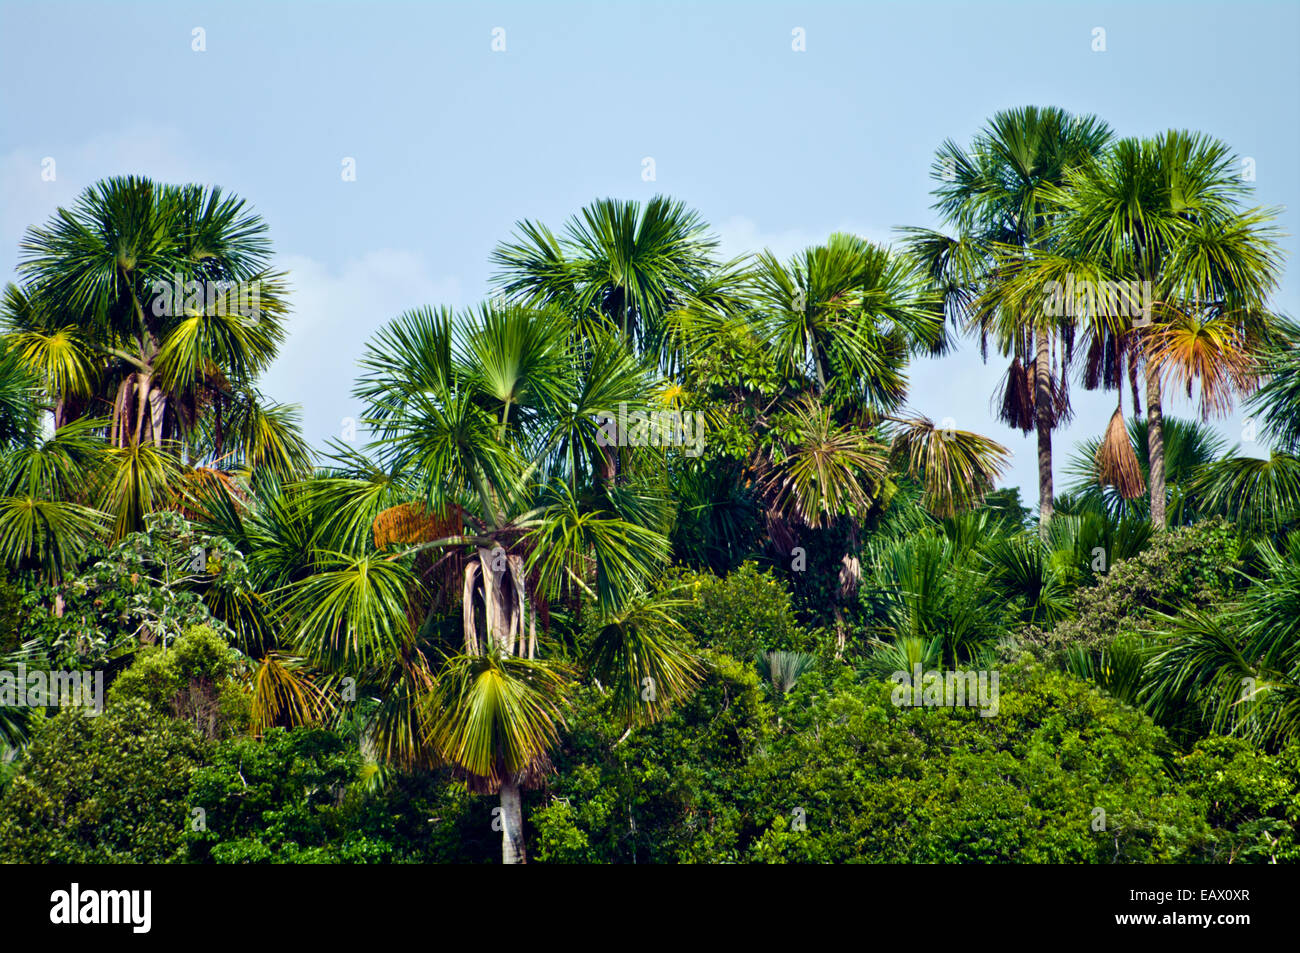 A stand of Moriche Palm trees tower above a lush tropical rainforest canopy. Stock Photo